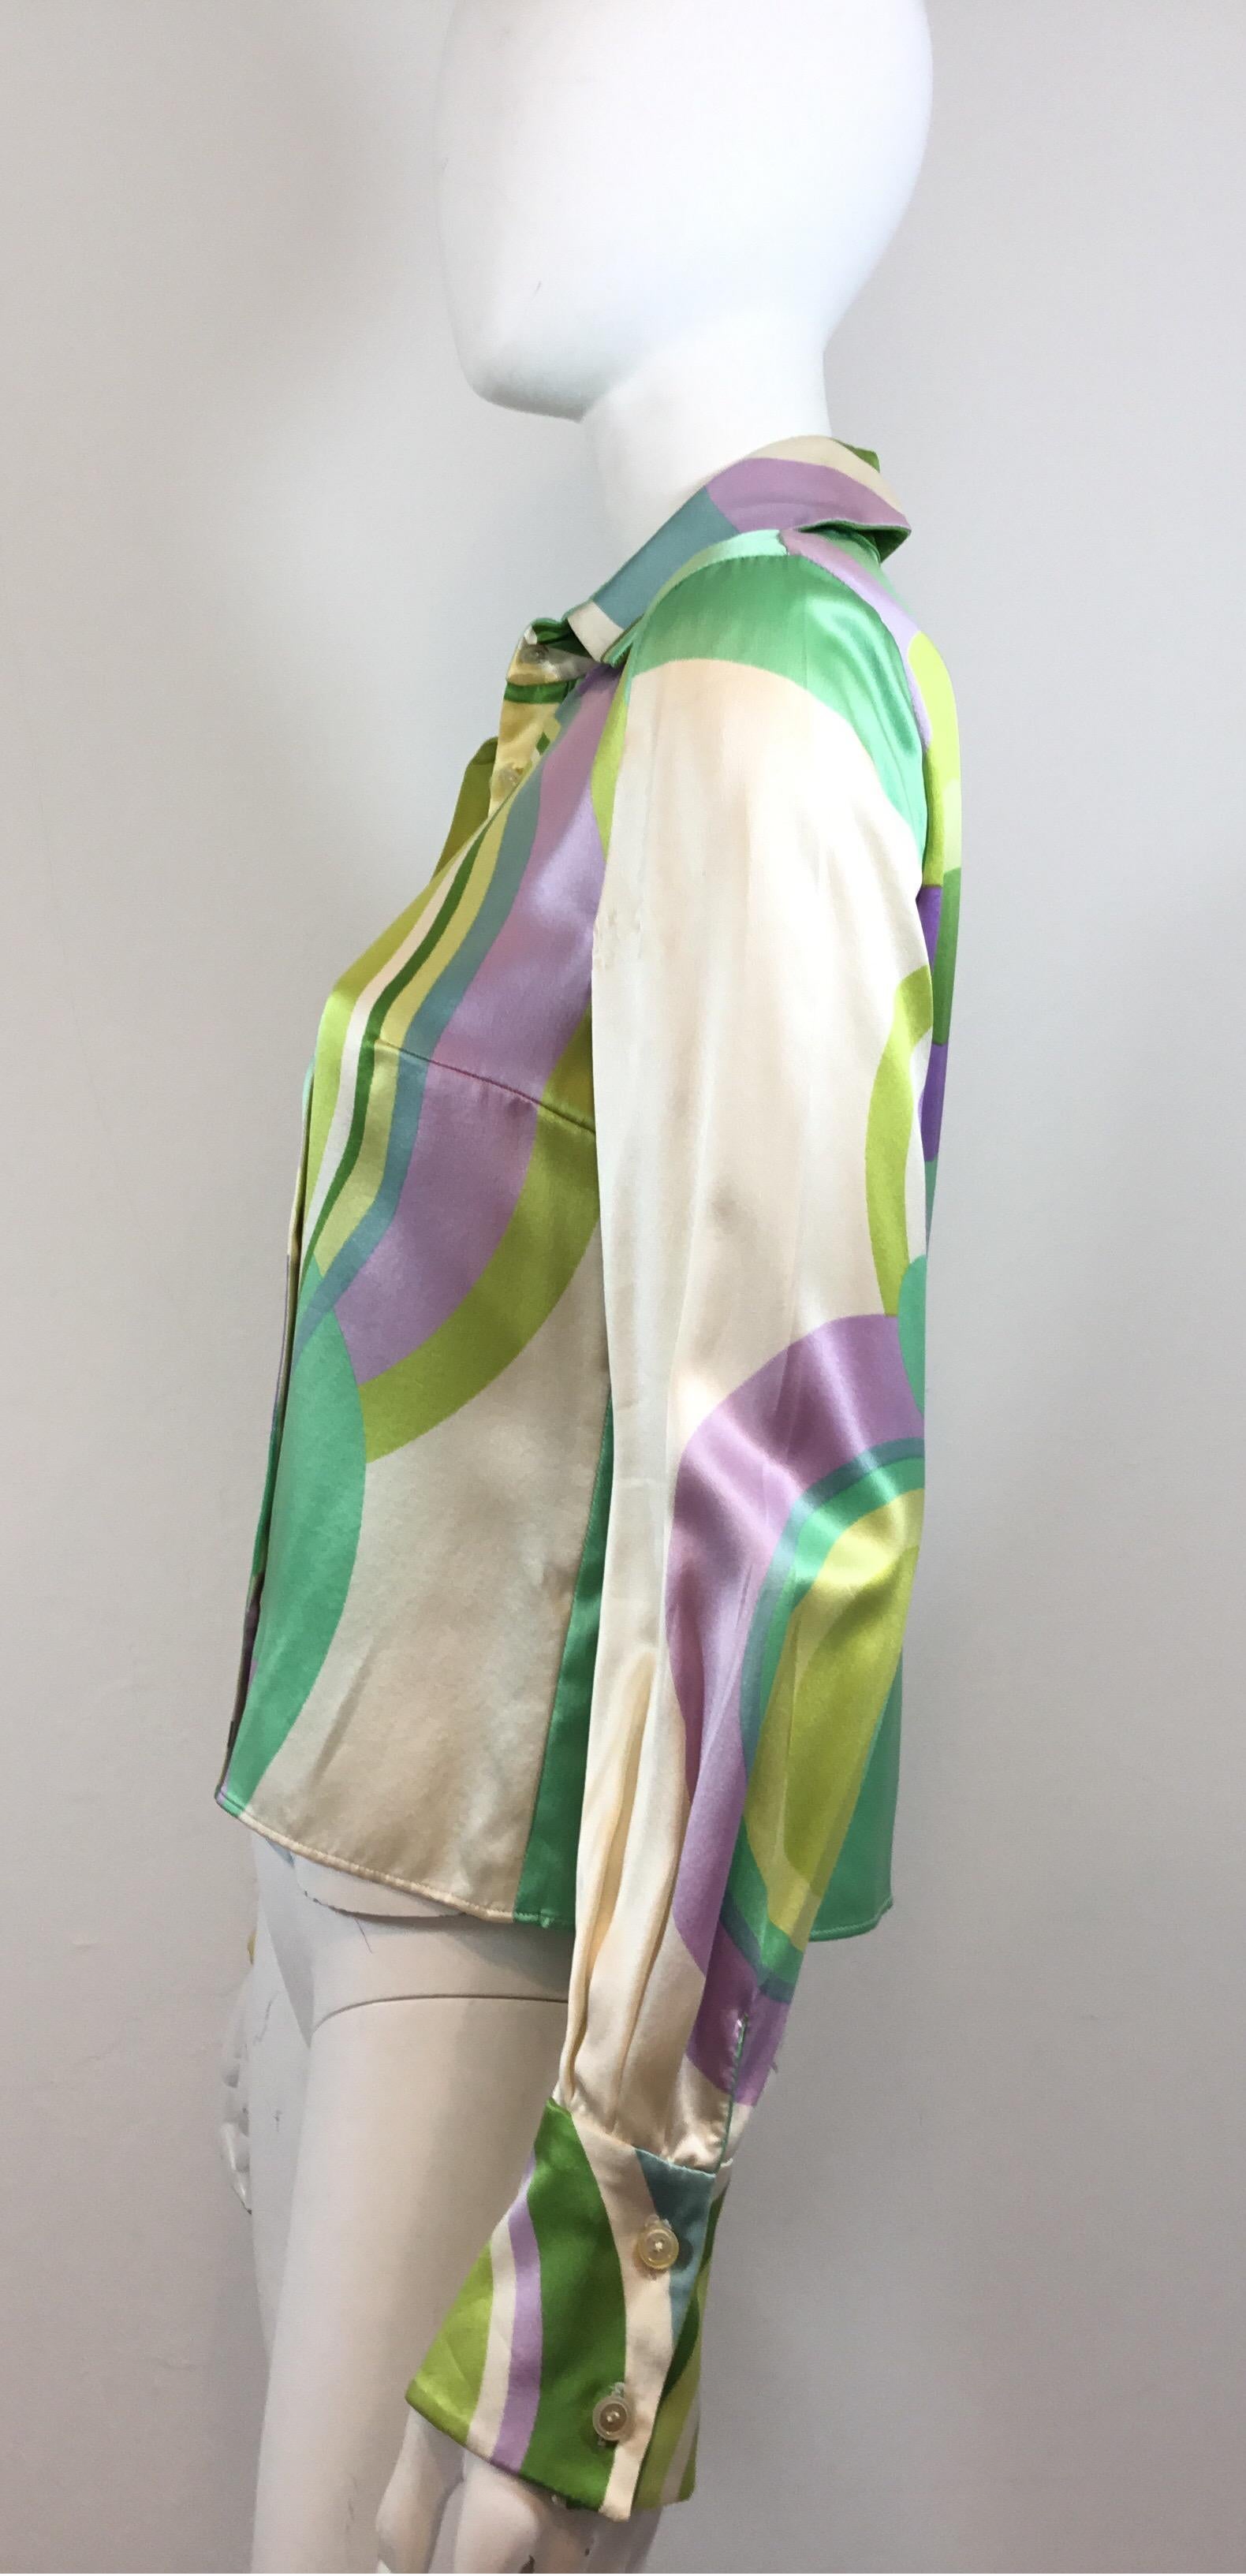 Vintage Gianni Versace Couture blouse featured in a pastel color palette, 100% satin silk with button fastenings. Made in Italy. Blouse has some wears to the silk along the sleeves. 

Bust 36”, Sleeves 25”, length 22”, shoulder to shoulder 16”